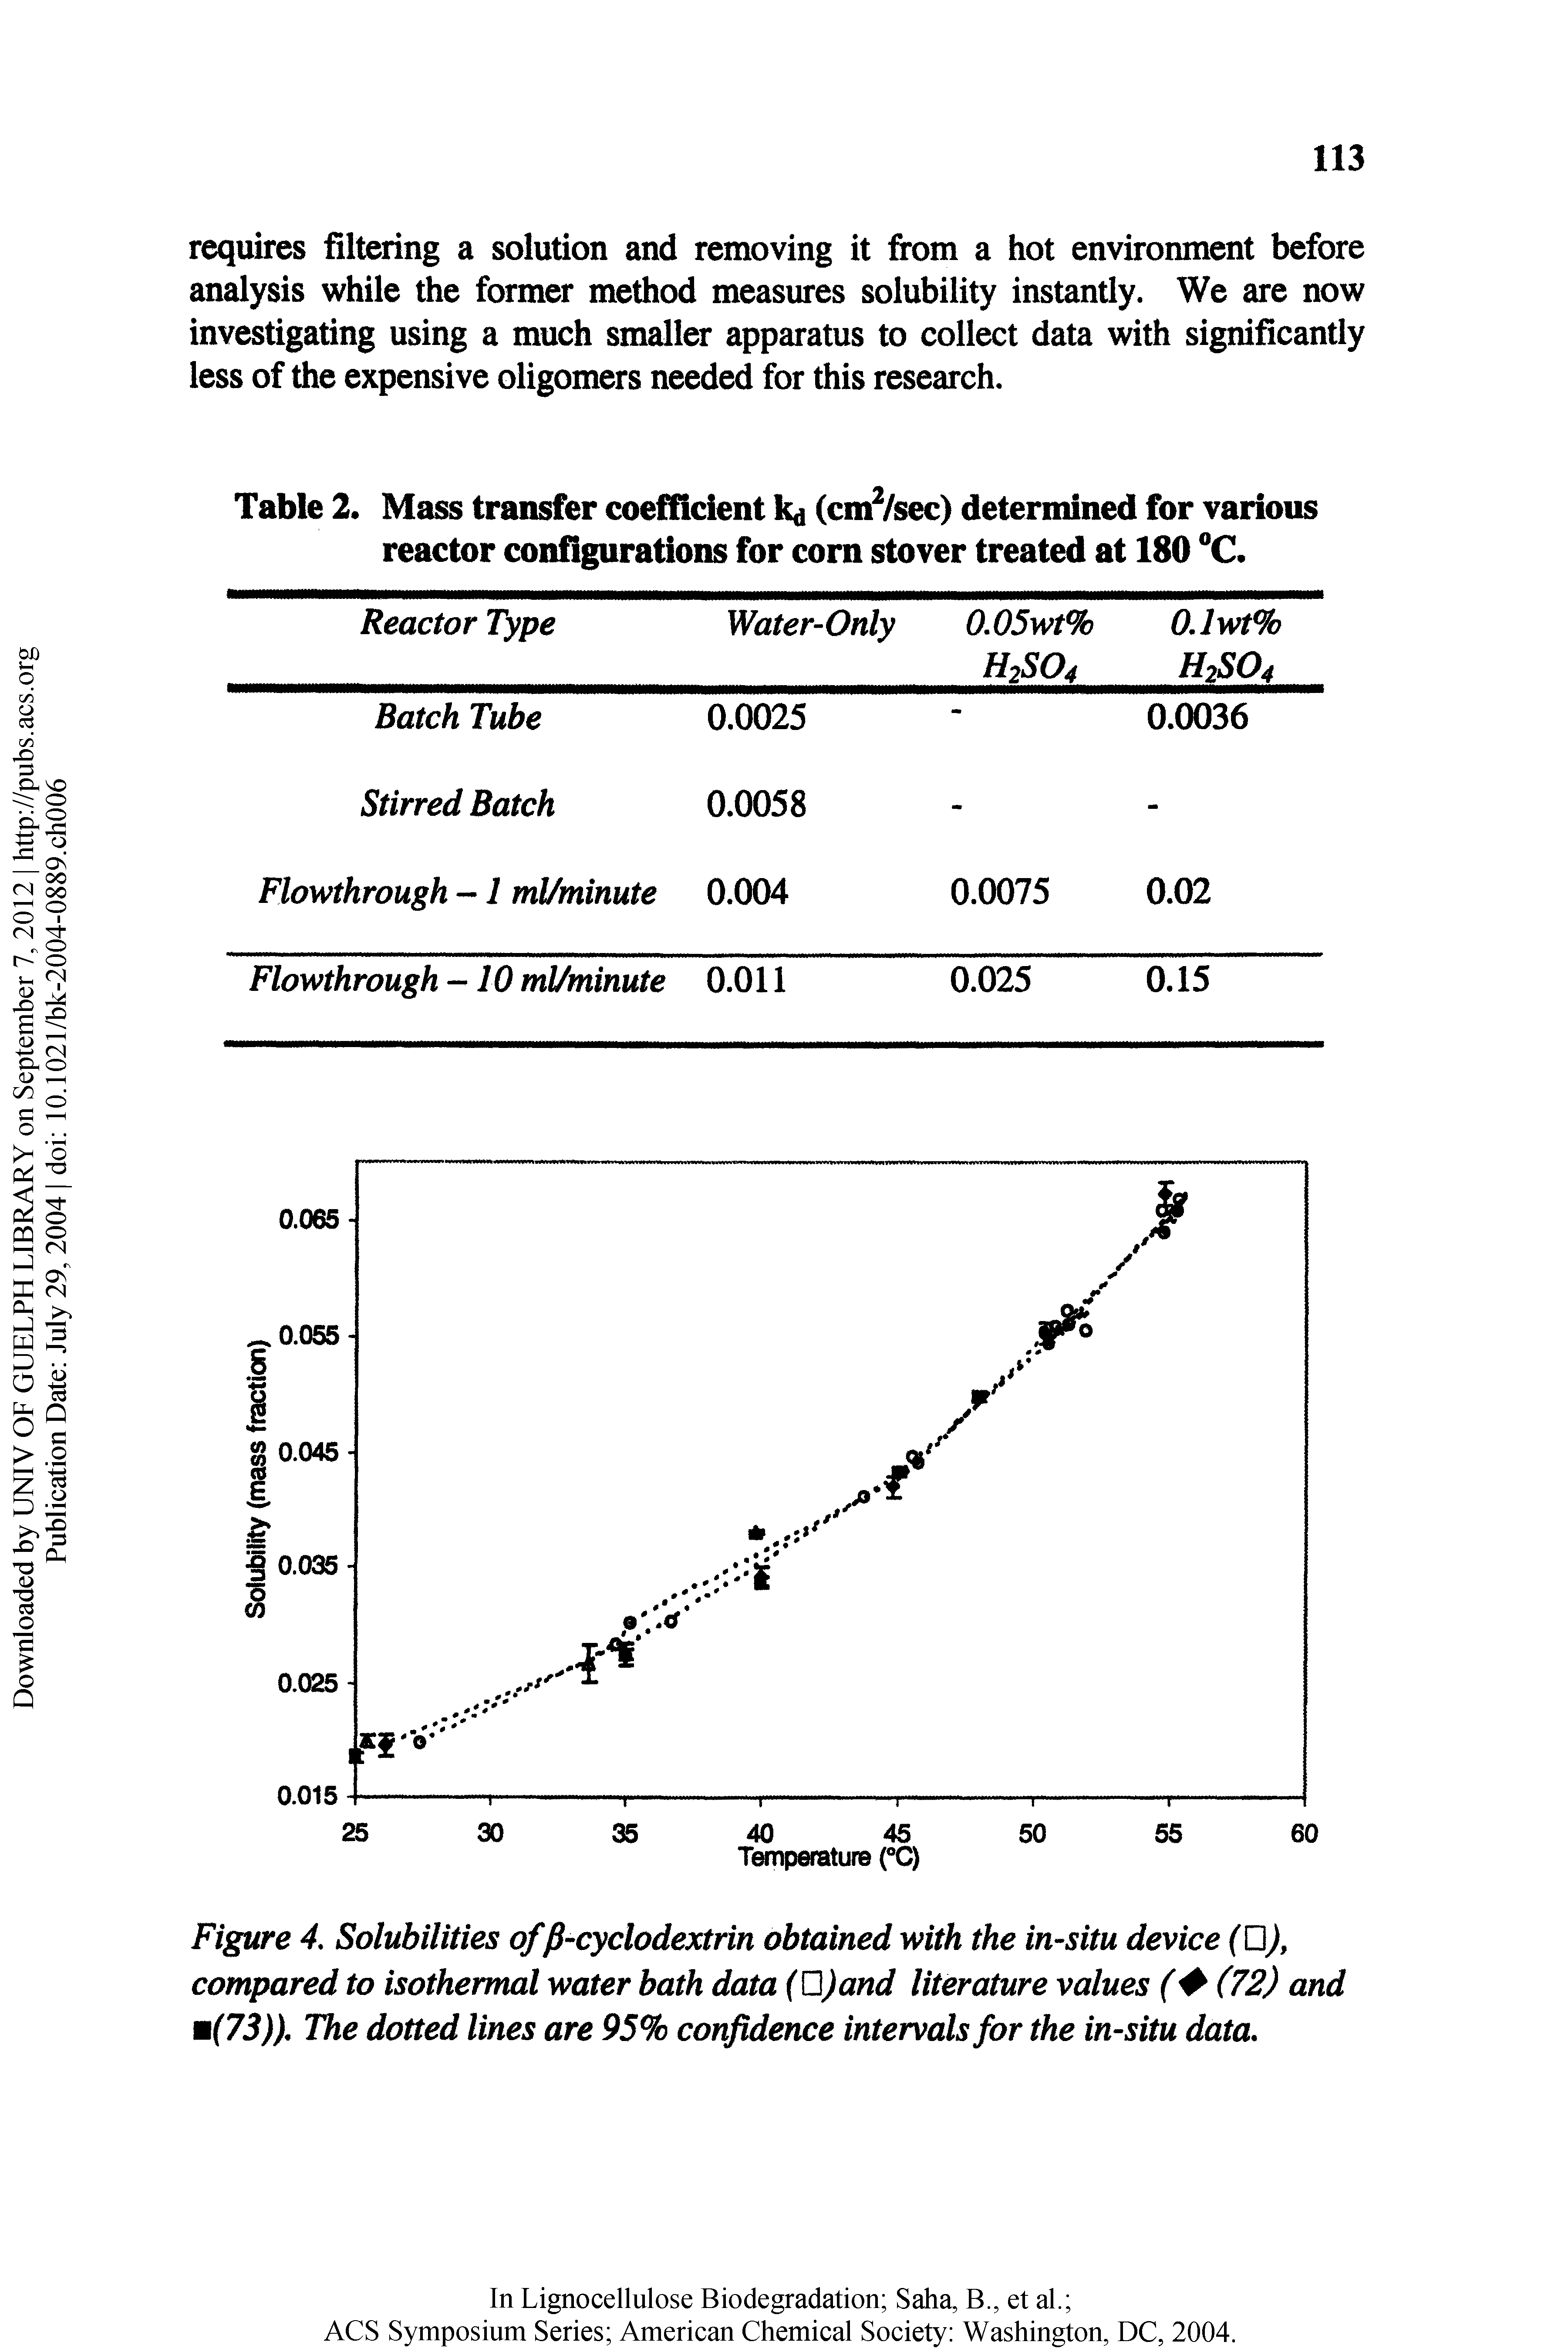 Figure 4. Solubilities offi-cyclodextrin obtained with the in-situ device (U), compared to isothermal water bath data (O)and literature values ( (72) and m(73)). The dotted lines are 95% confidence intervals for the in-situ data.